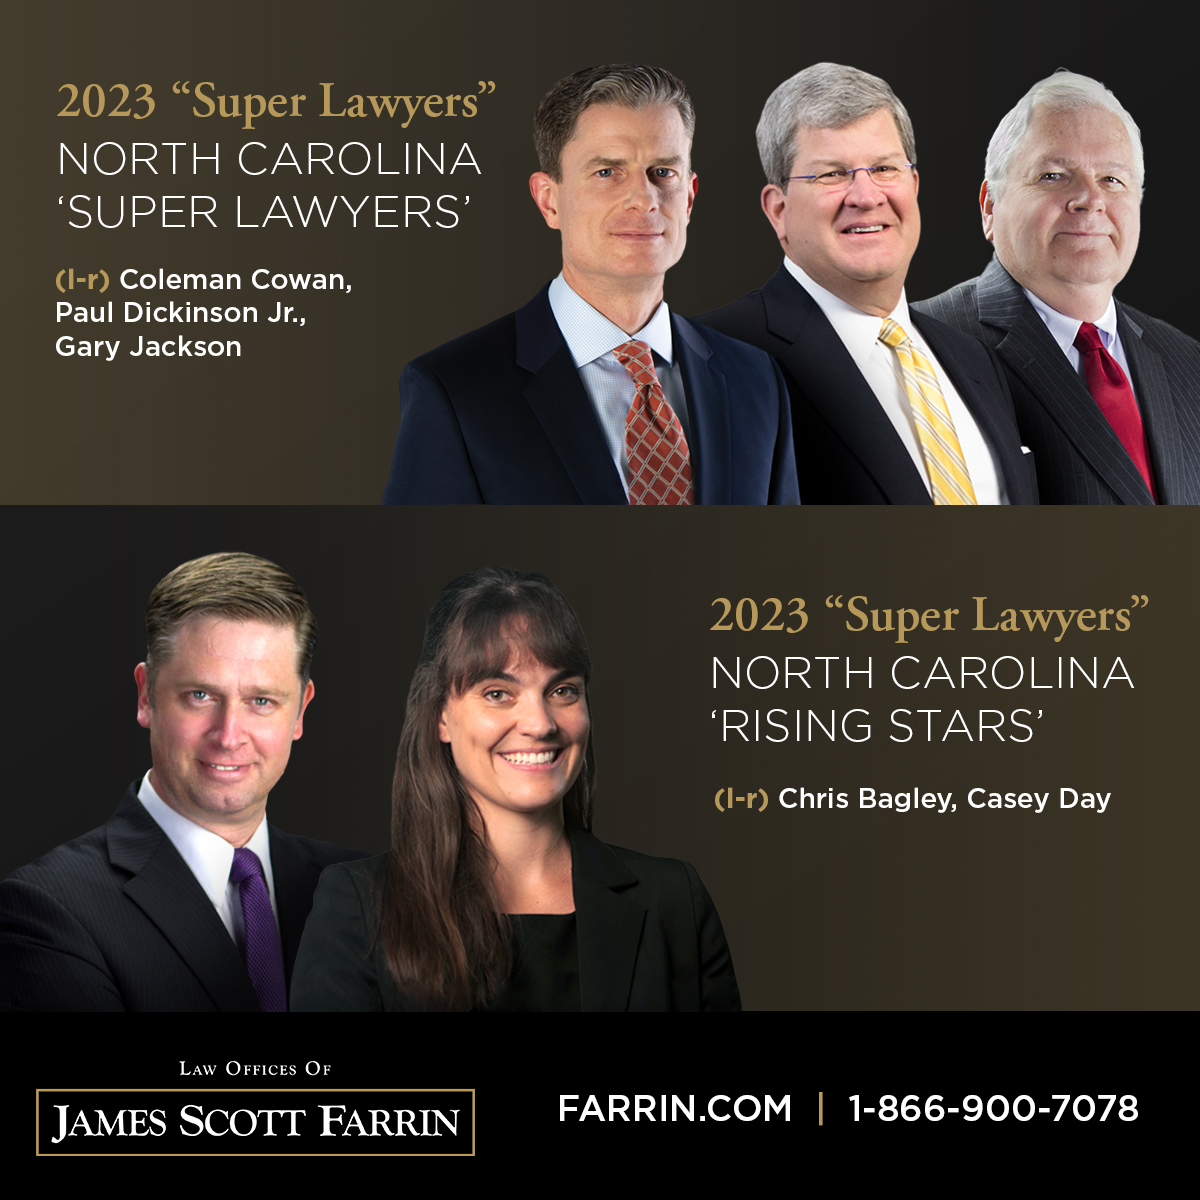 Infographic showcasing '2023 Super Lawyers' and '2023 Rising Stars' Attorneys at James Scott Farrin.